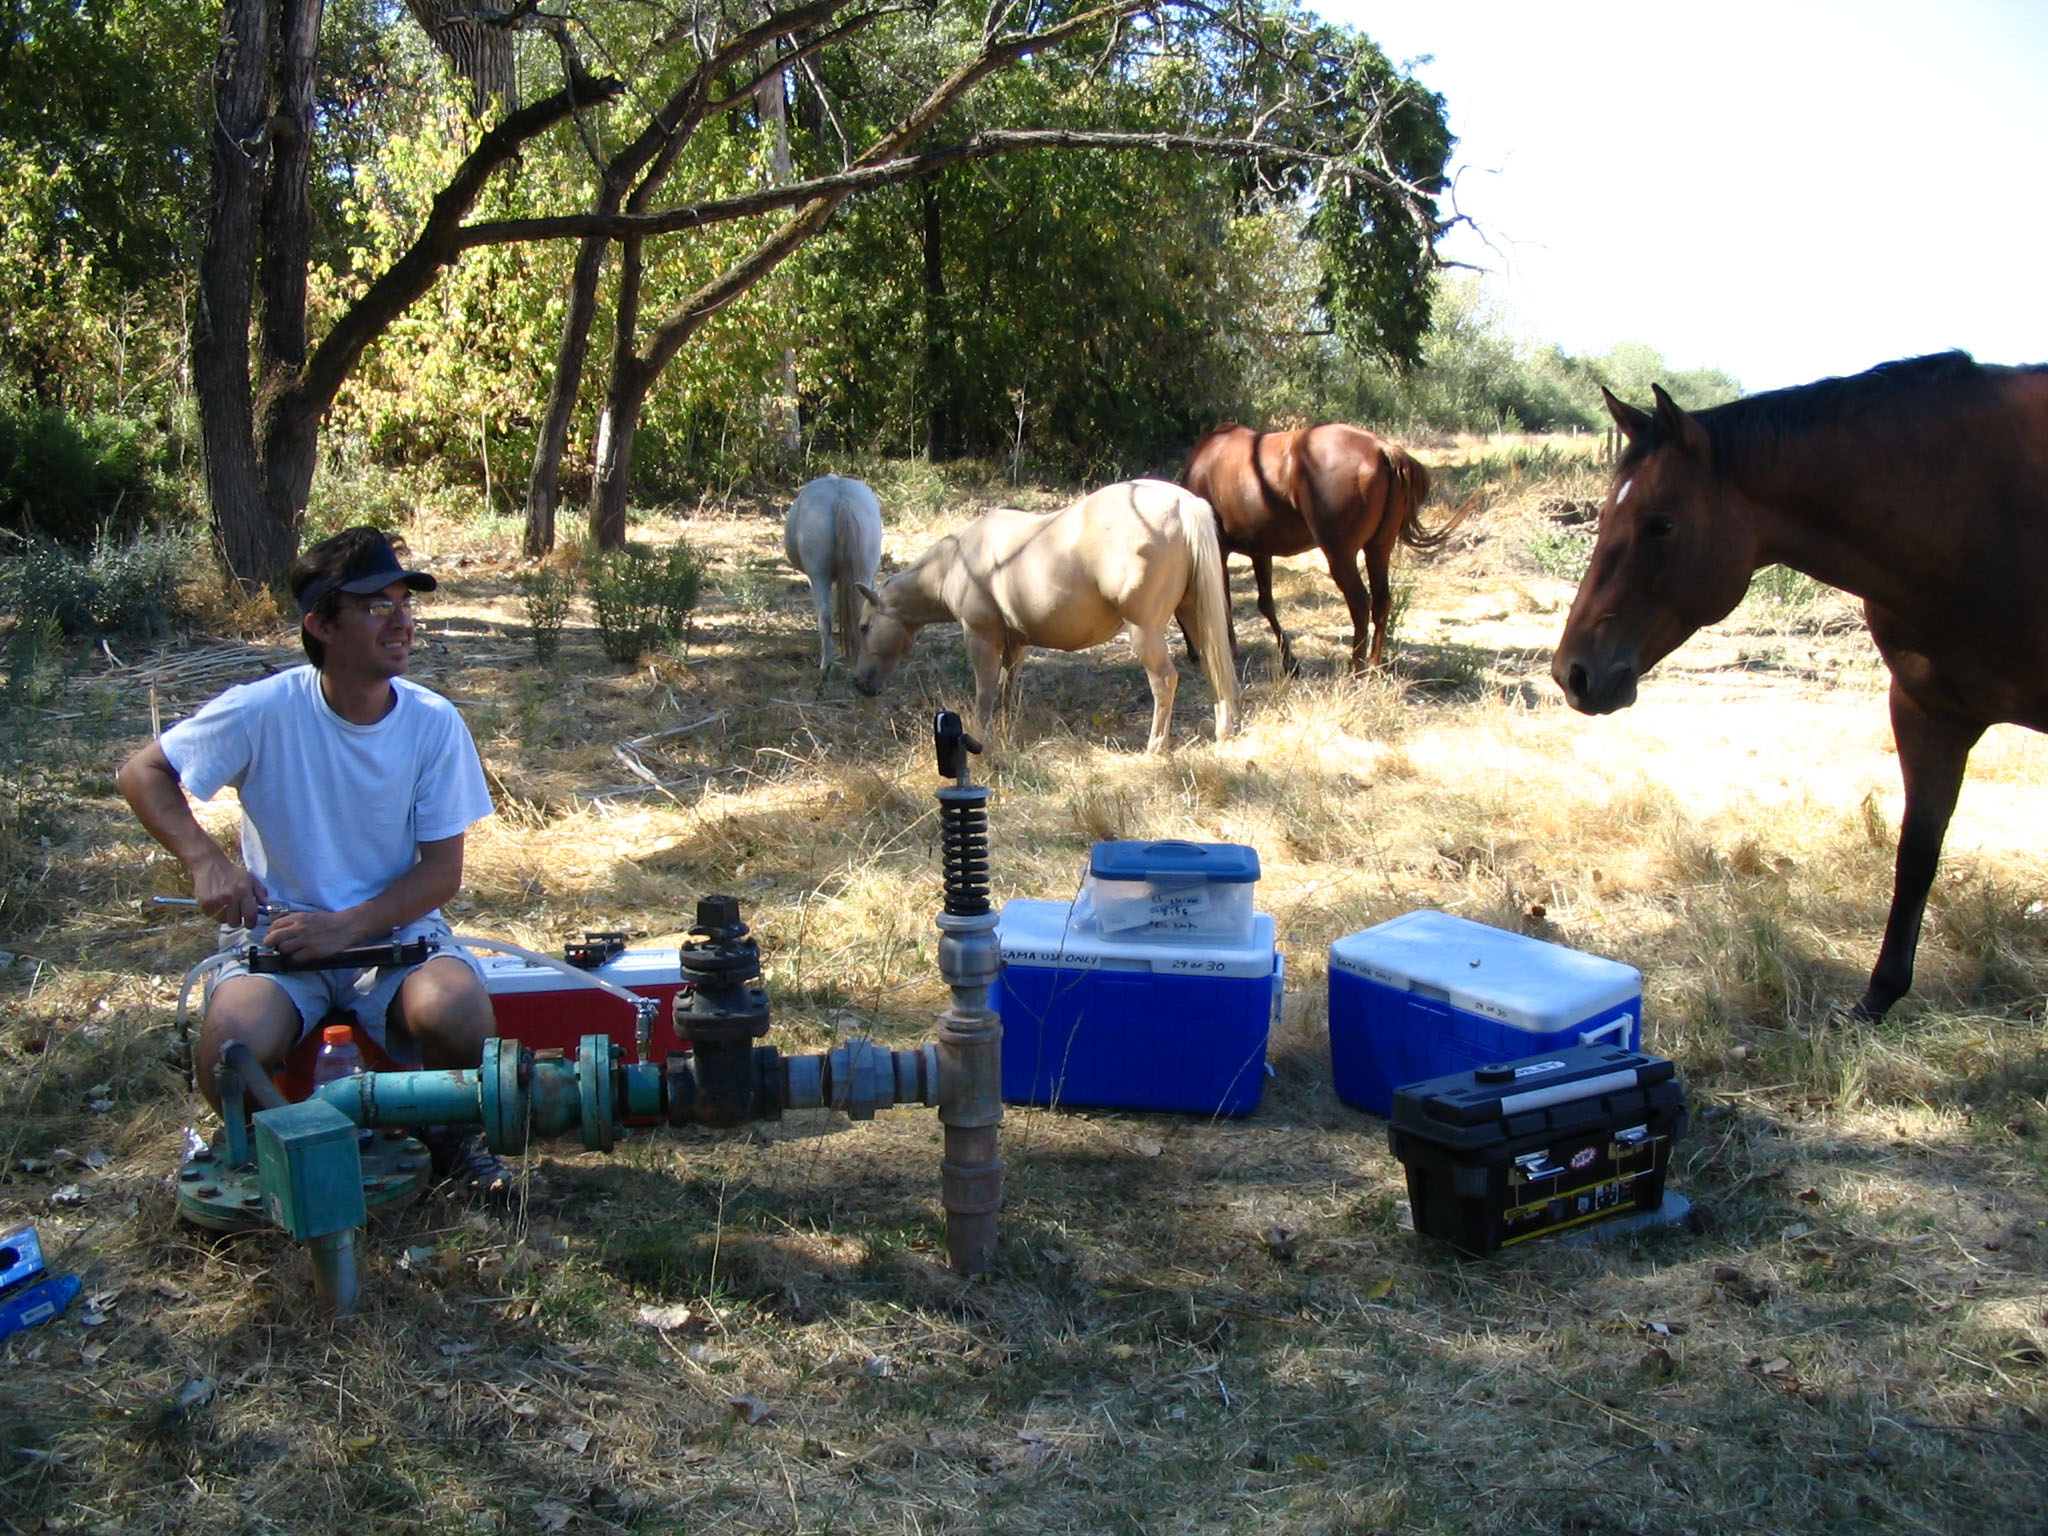 Curious horses visit geographer taking groundwater quality samples in field